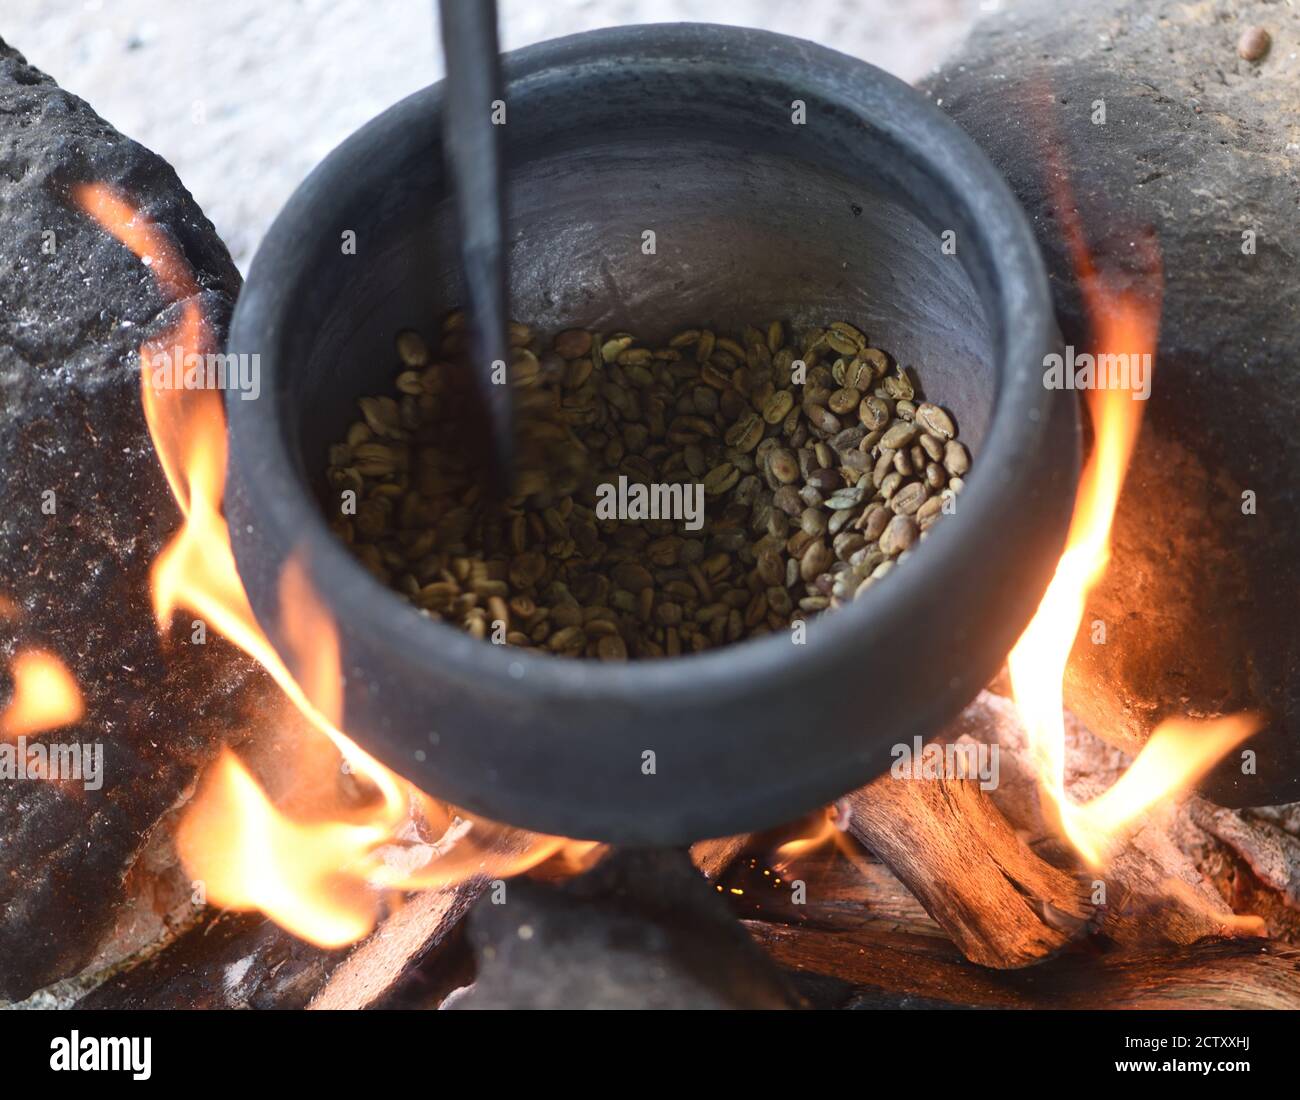 Locally grown coffee being roasted over an open wood fire in a heavy iron pot. Moshi, Tanzania. Stock Photo